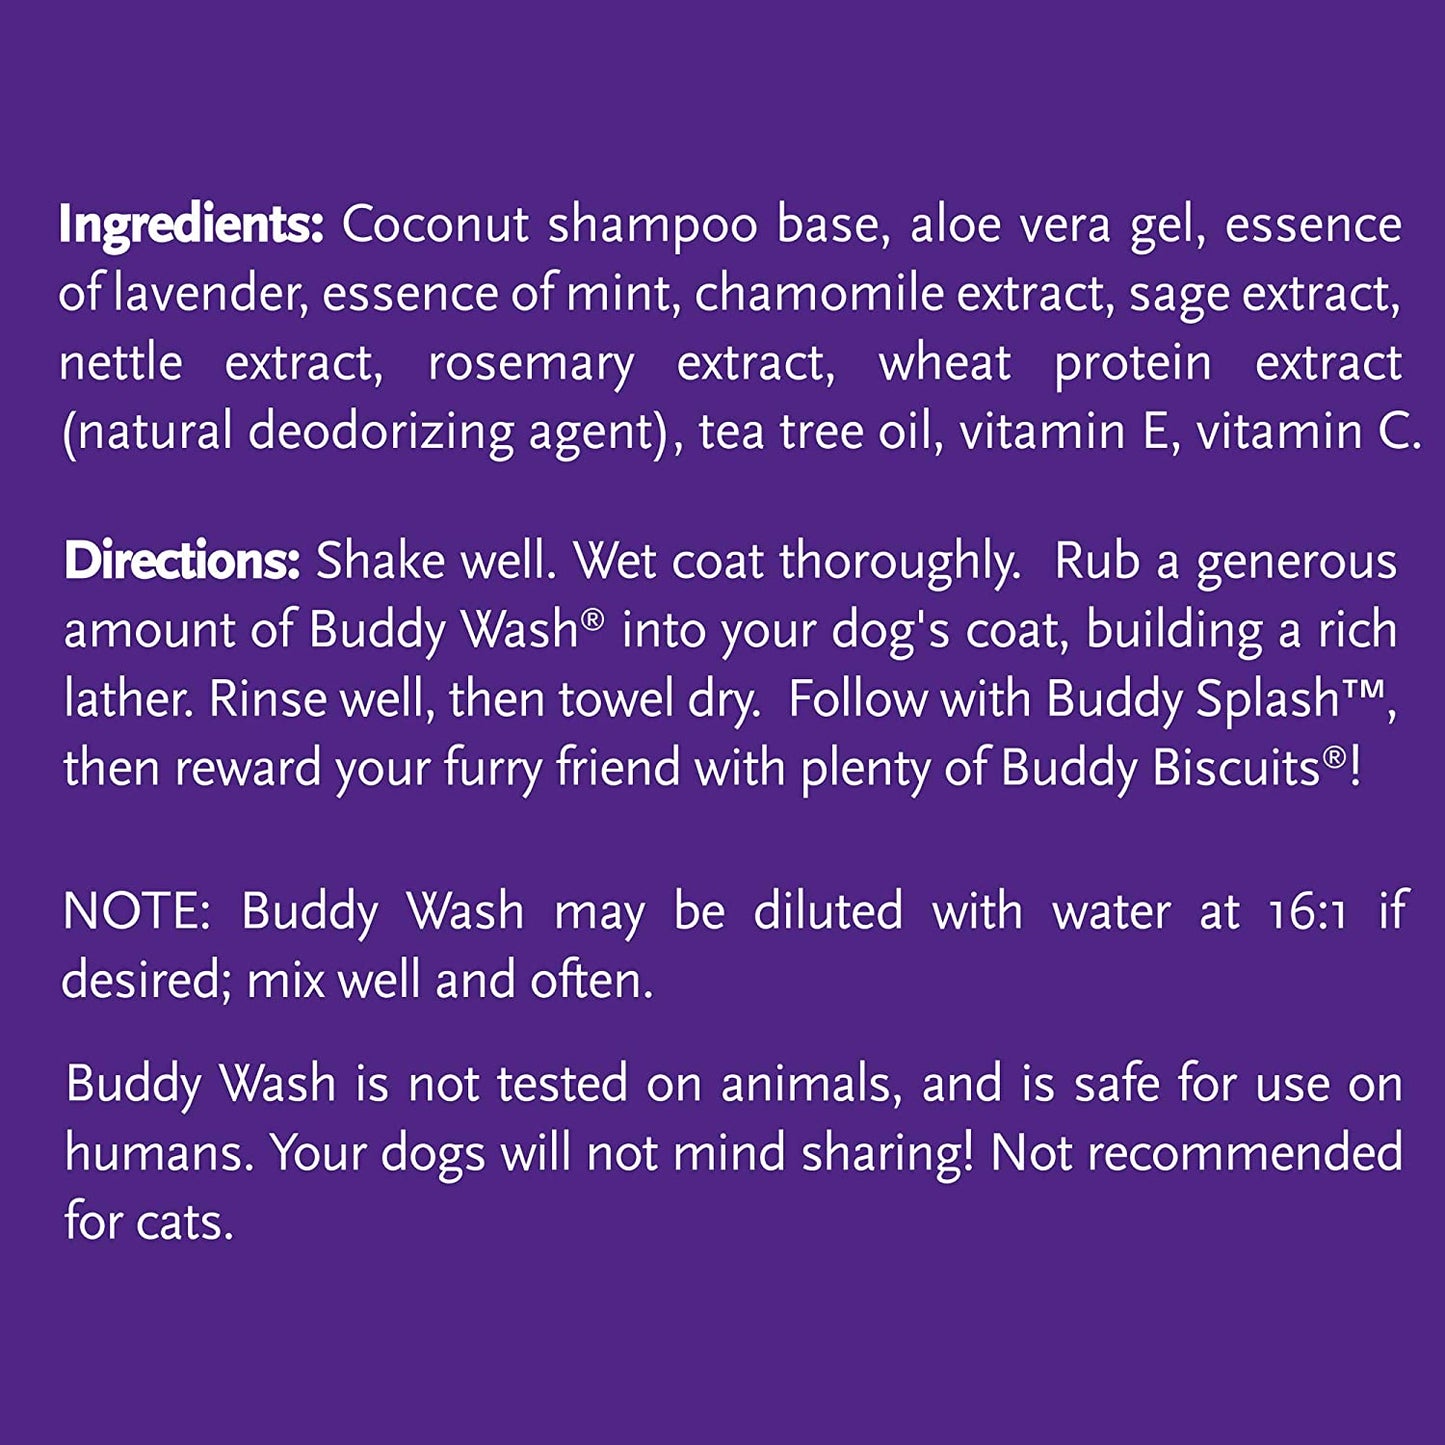 Buddy Wash 2-In-1 Dog Shampoo and Conditioner for Dog Grooming, Lavender & Mint, 1 Gal. Bottle